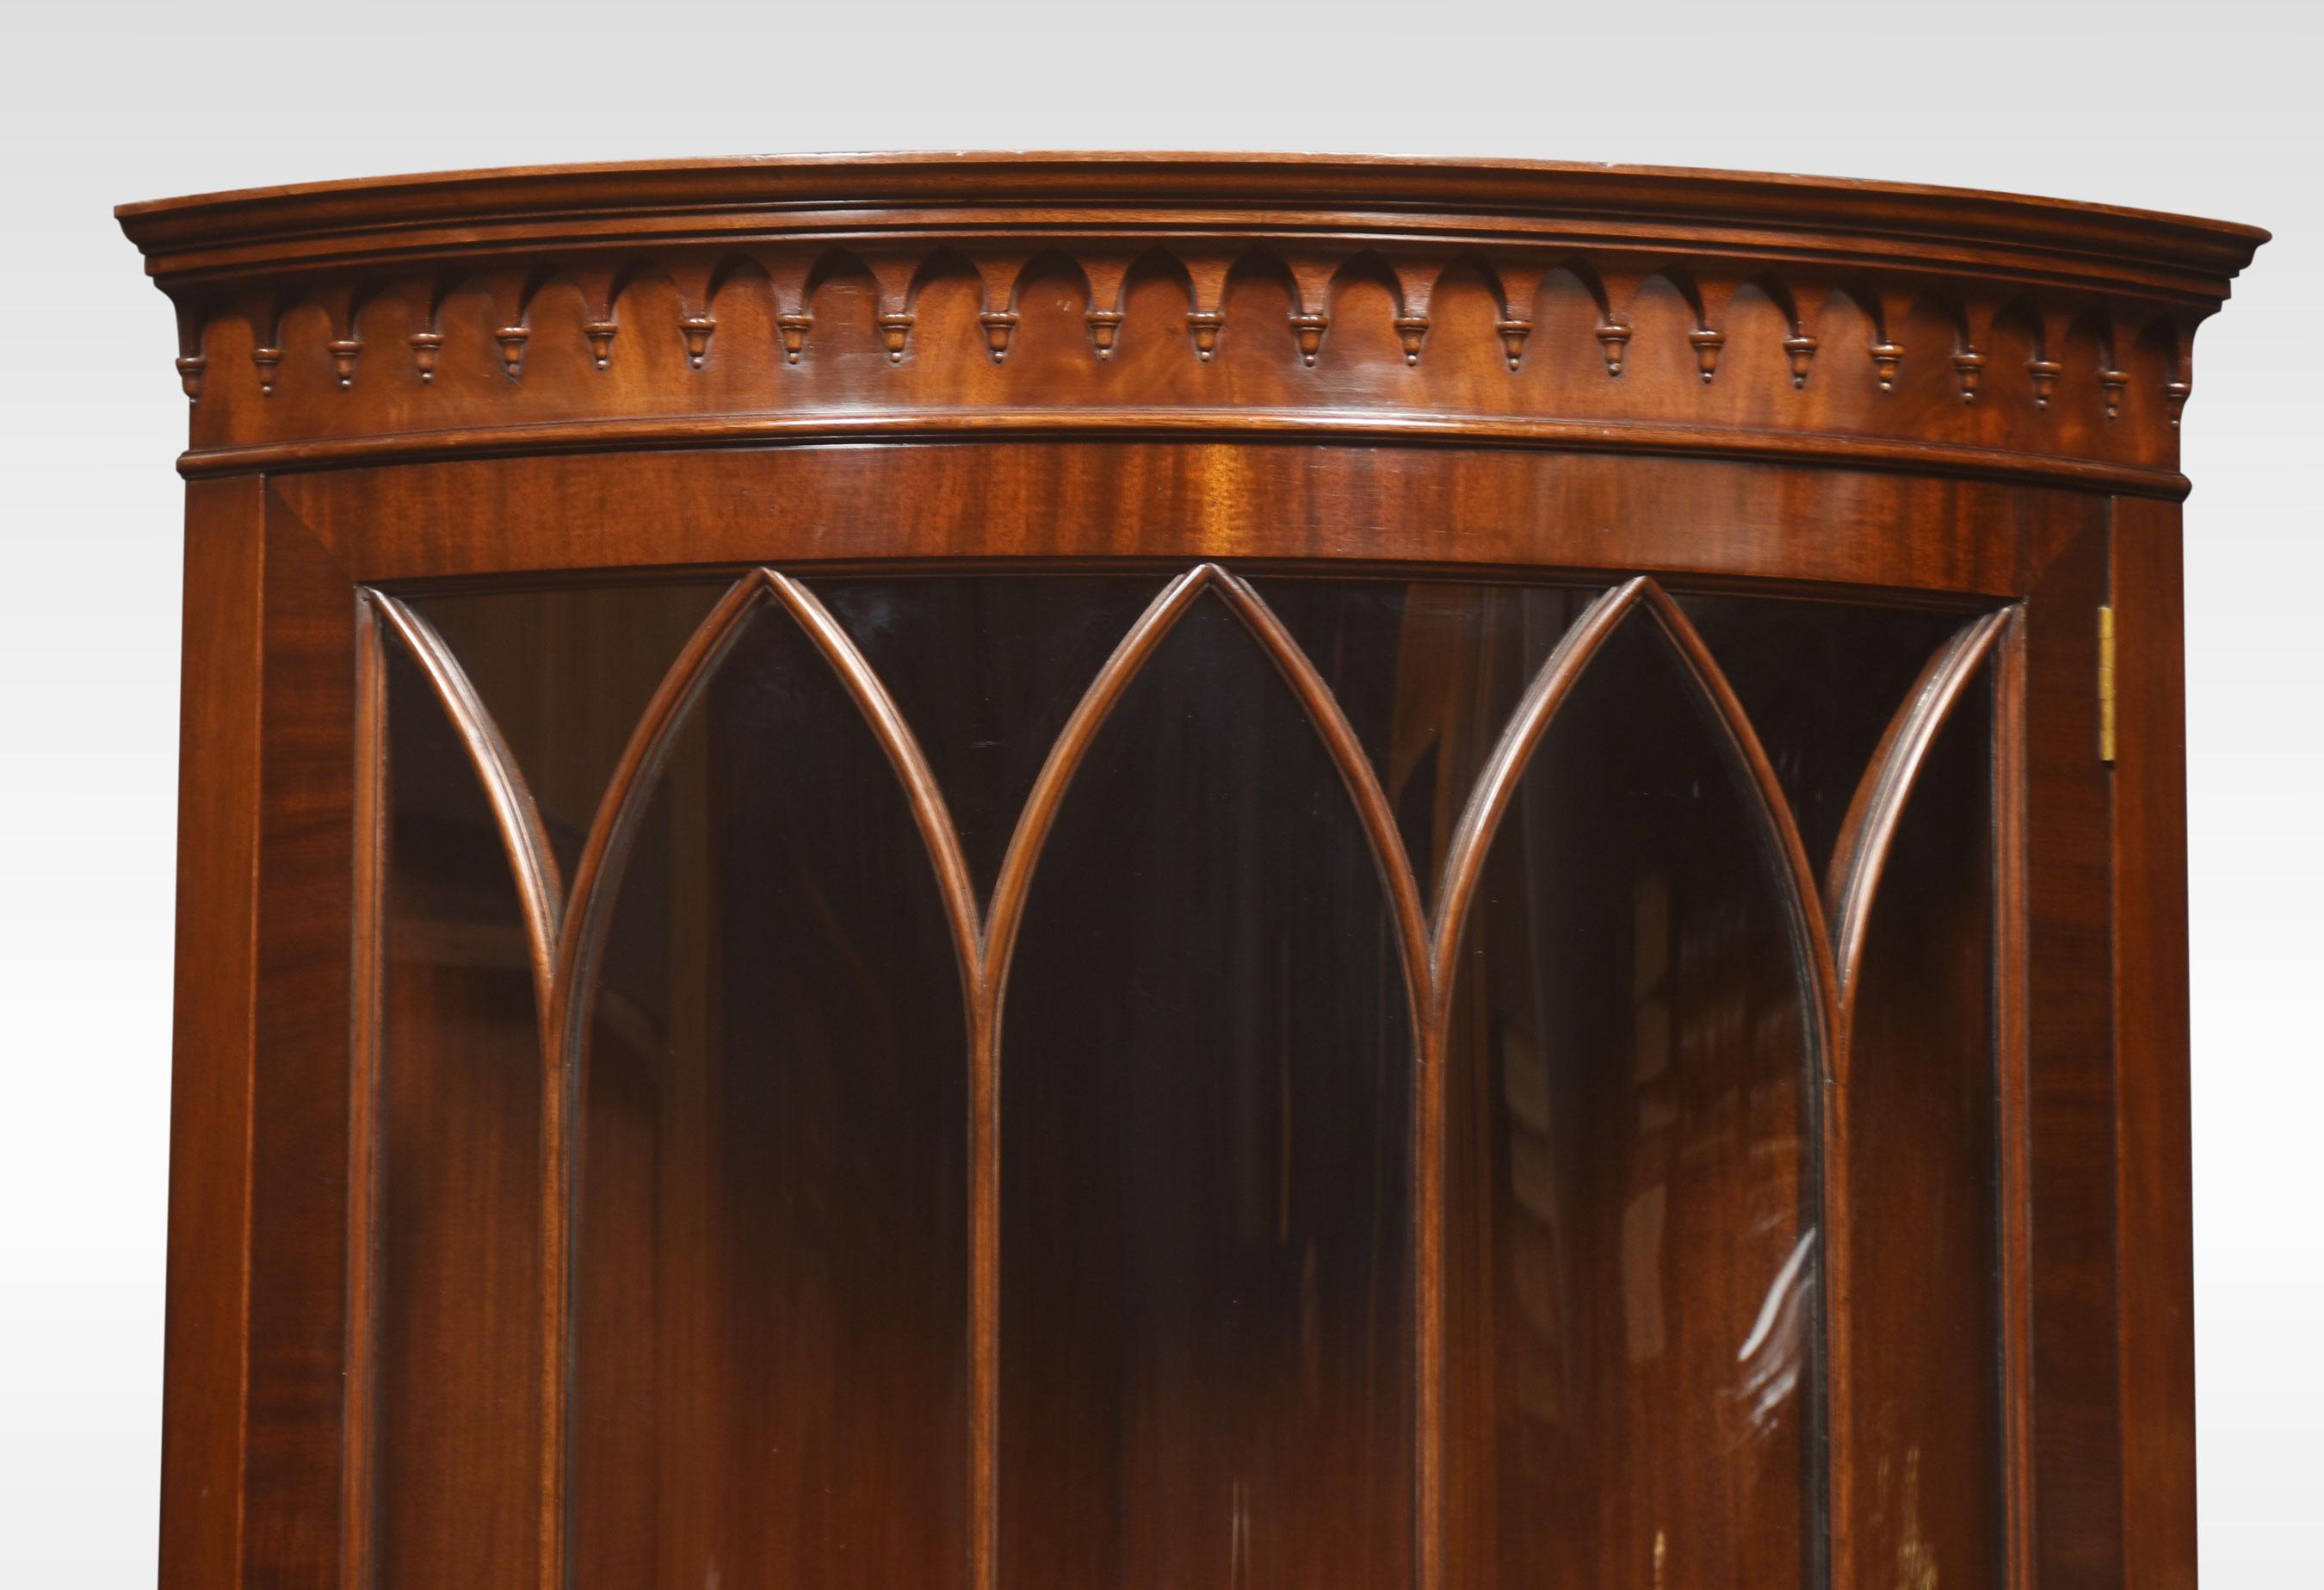 Mahogany standing bow fronted corner cabinet, the bow-fronted astragal glazed full-length door opening to reveal a shelved interior. All raised up on shaped plinth and bracket feet.
Dimensions
Height 71.5 inches
Width 28.5 inches
Depth 19.5